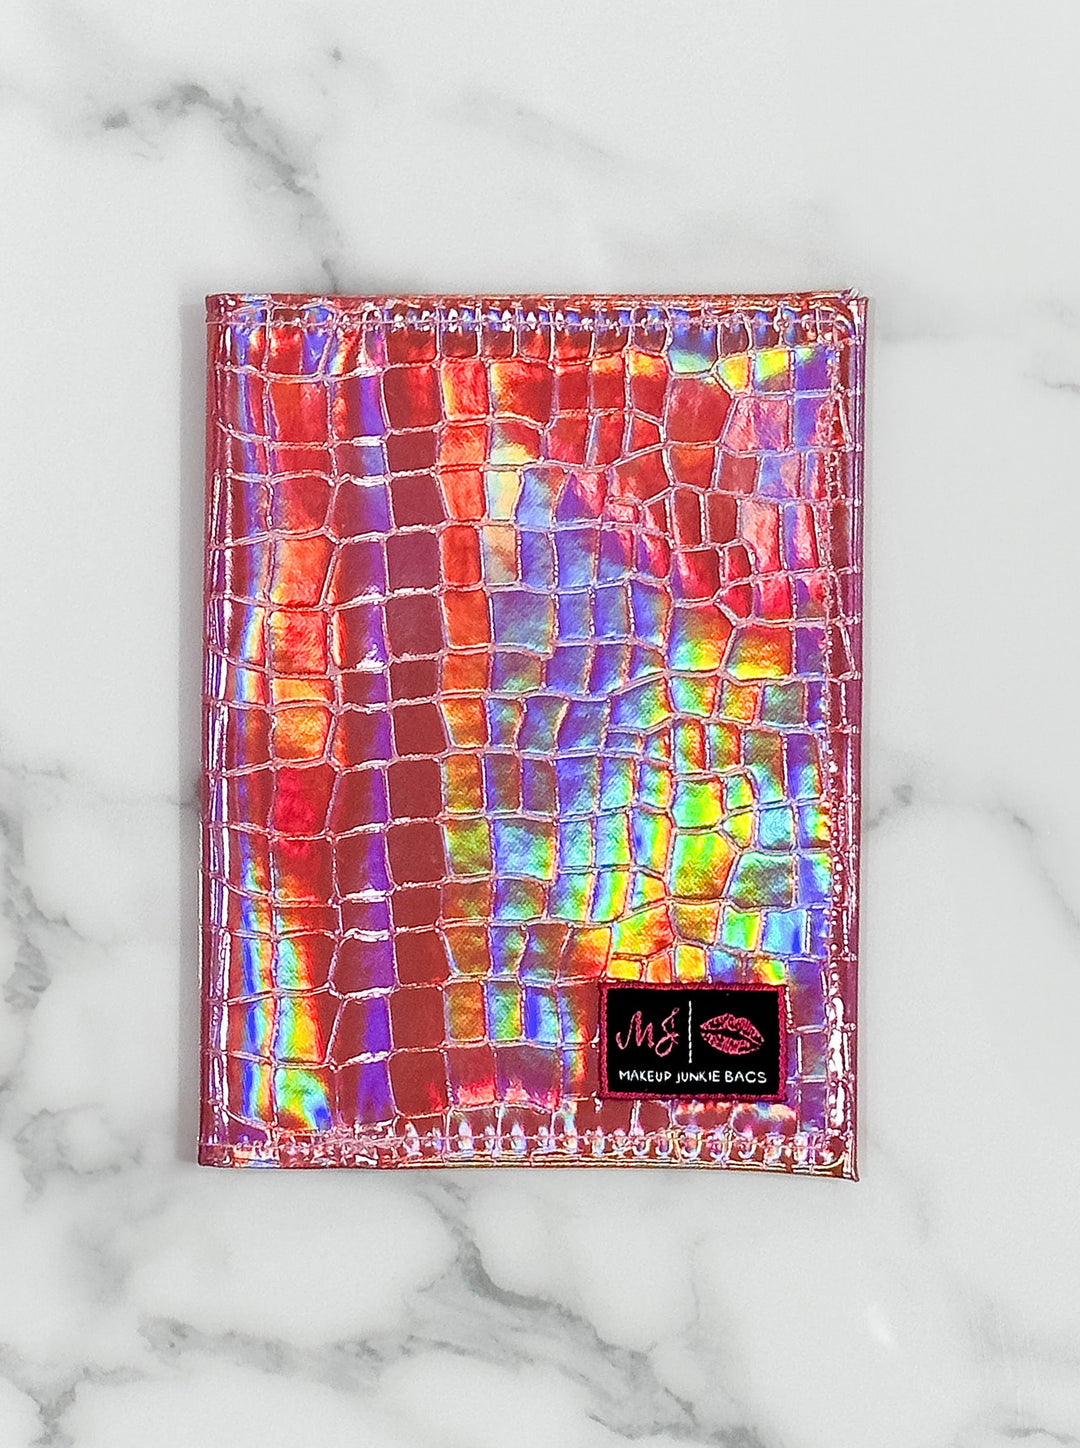 Makeup Junkie Bags - Pink Holographic Passport Travel Book [Pre-Order] Glamfox Exclusive